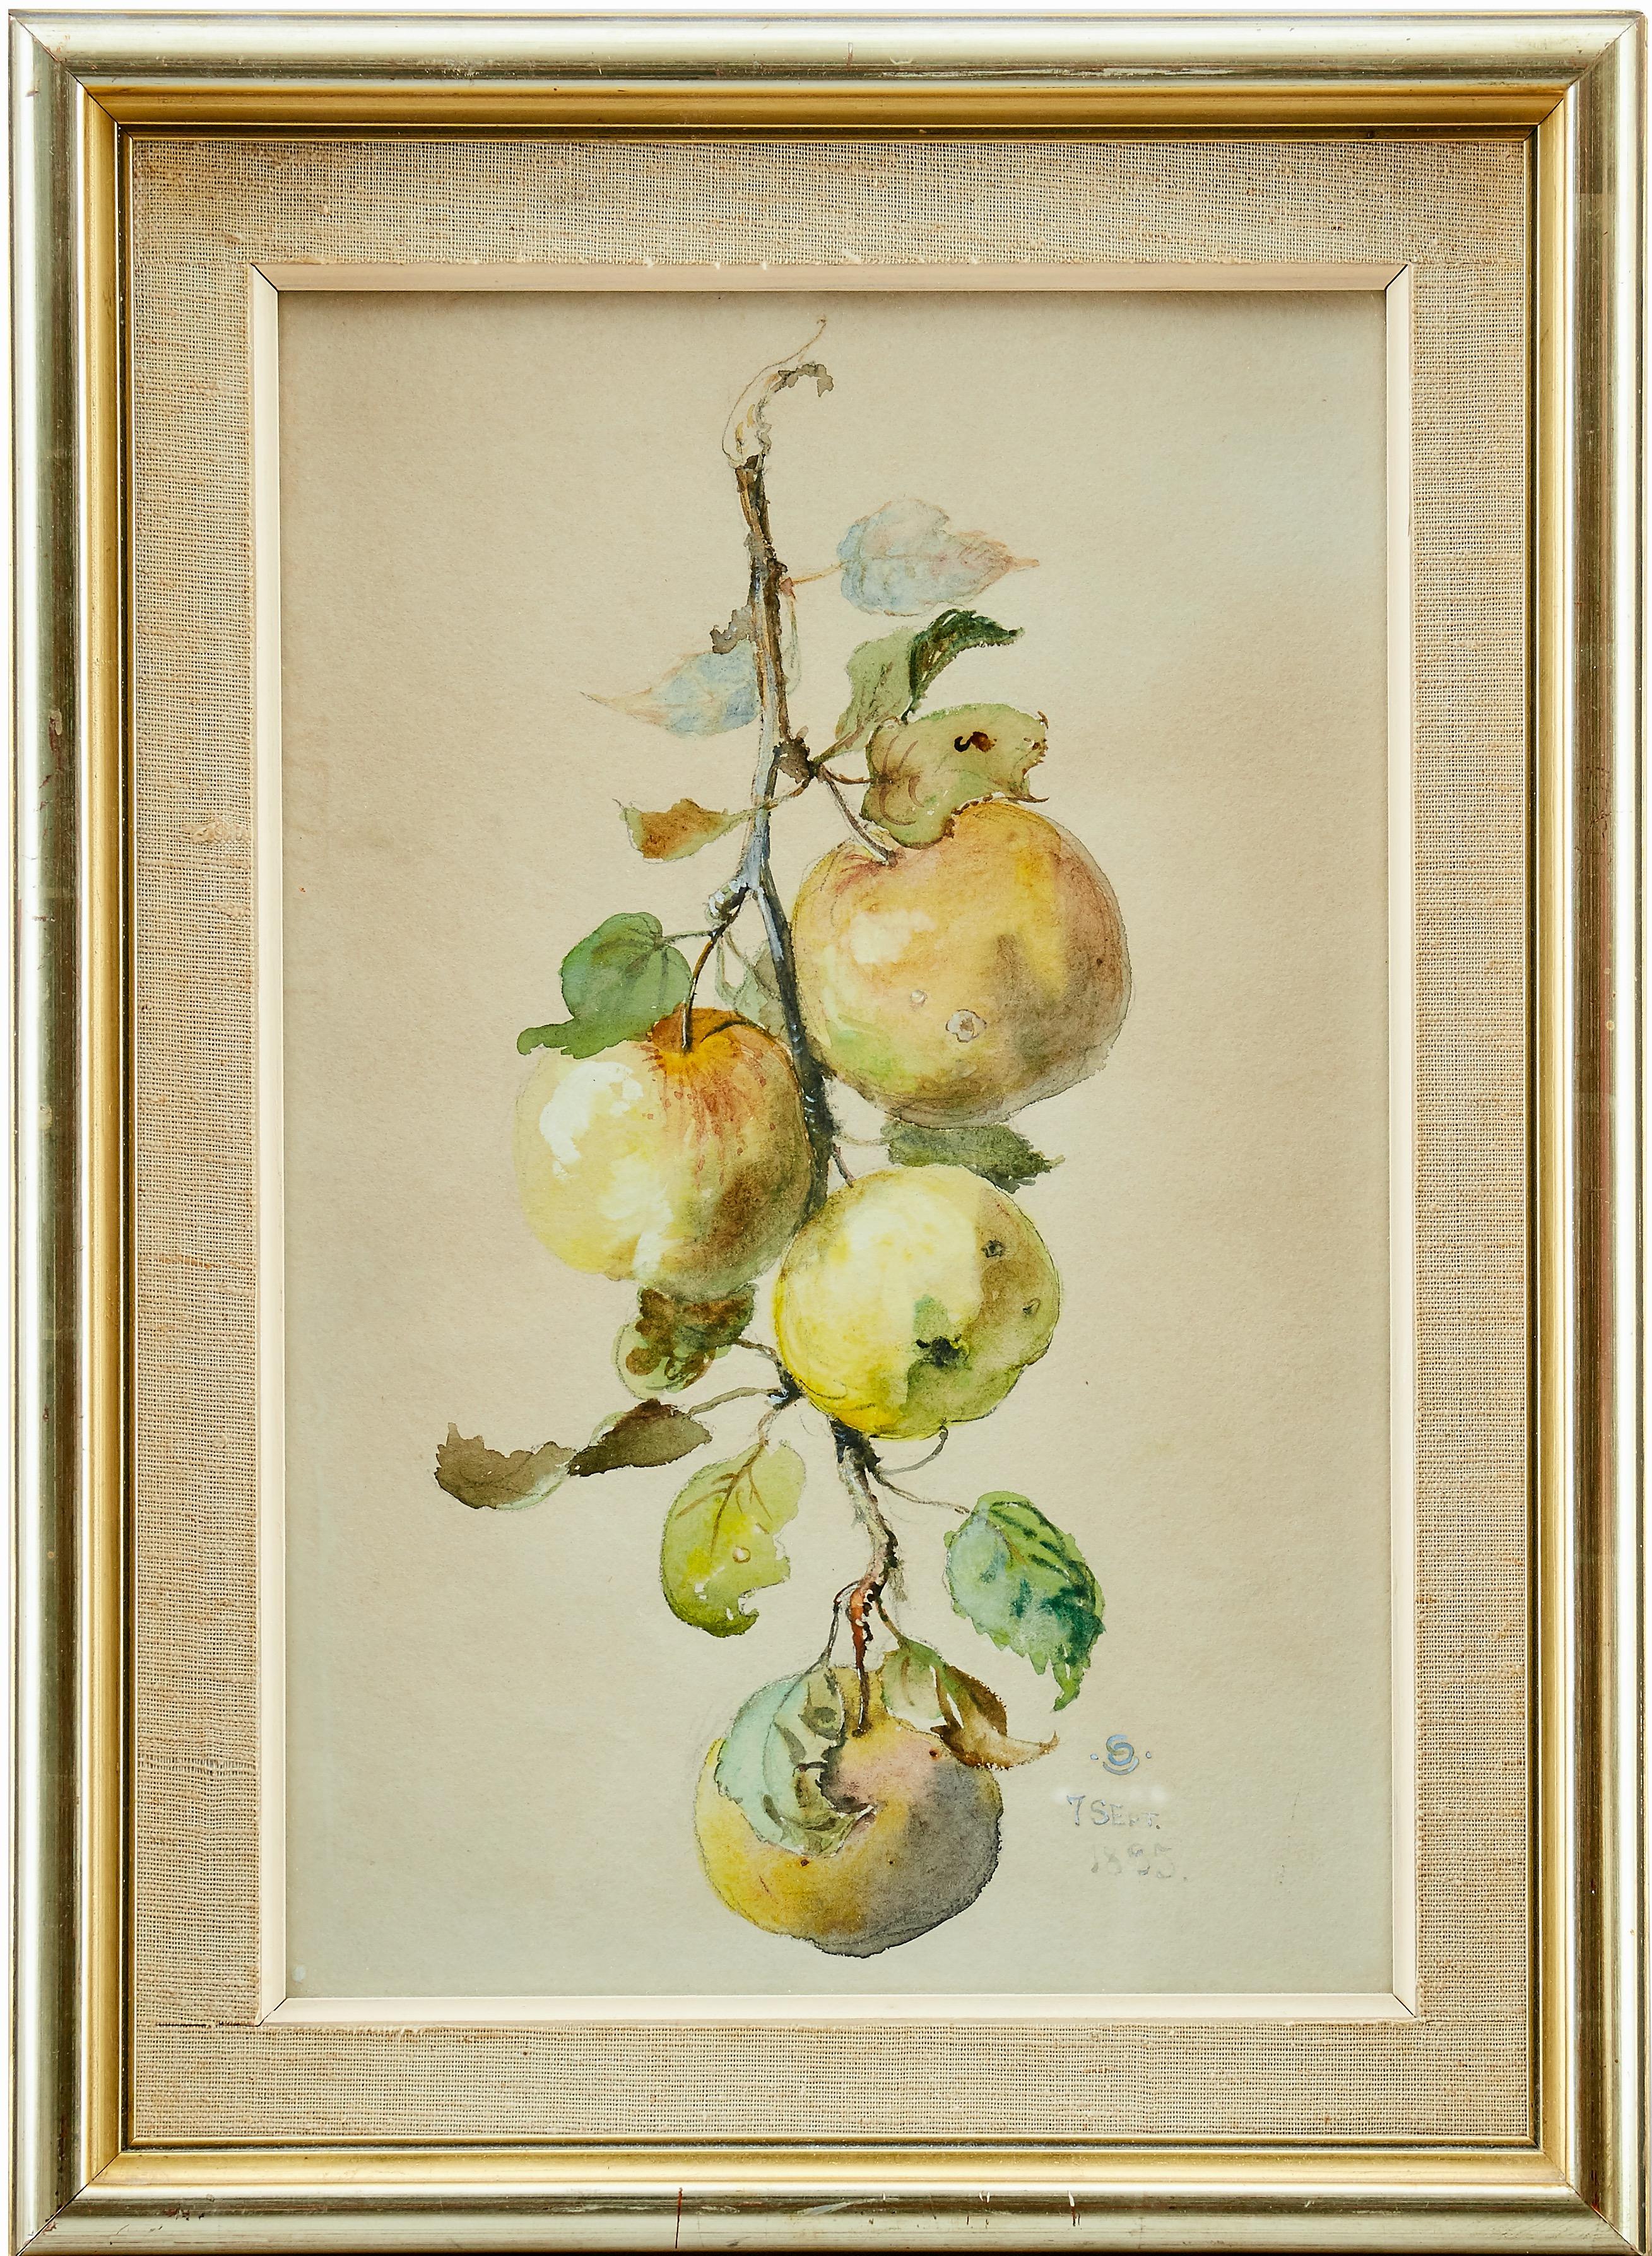 A beautifully painted branch with green and reddish apples by Otto Strandman (1871-1960). Signed with monogram 'OS' and dated '7 SEPT. 1895'. Watercolor and gouache on paper. 

Otto Strandman received his education at the The College of Design and